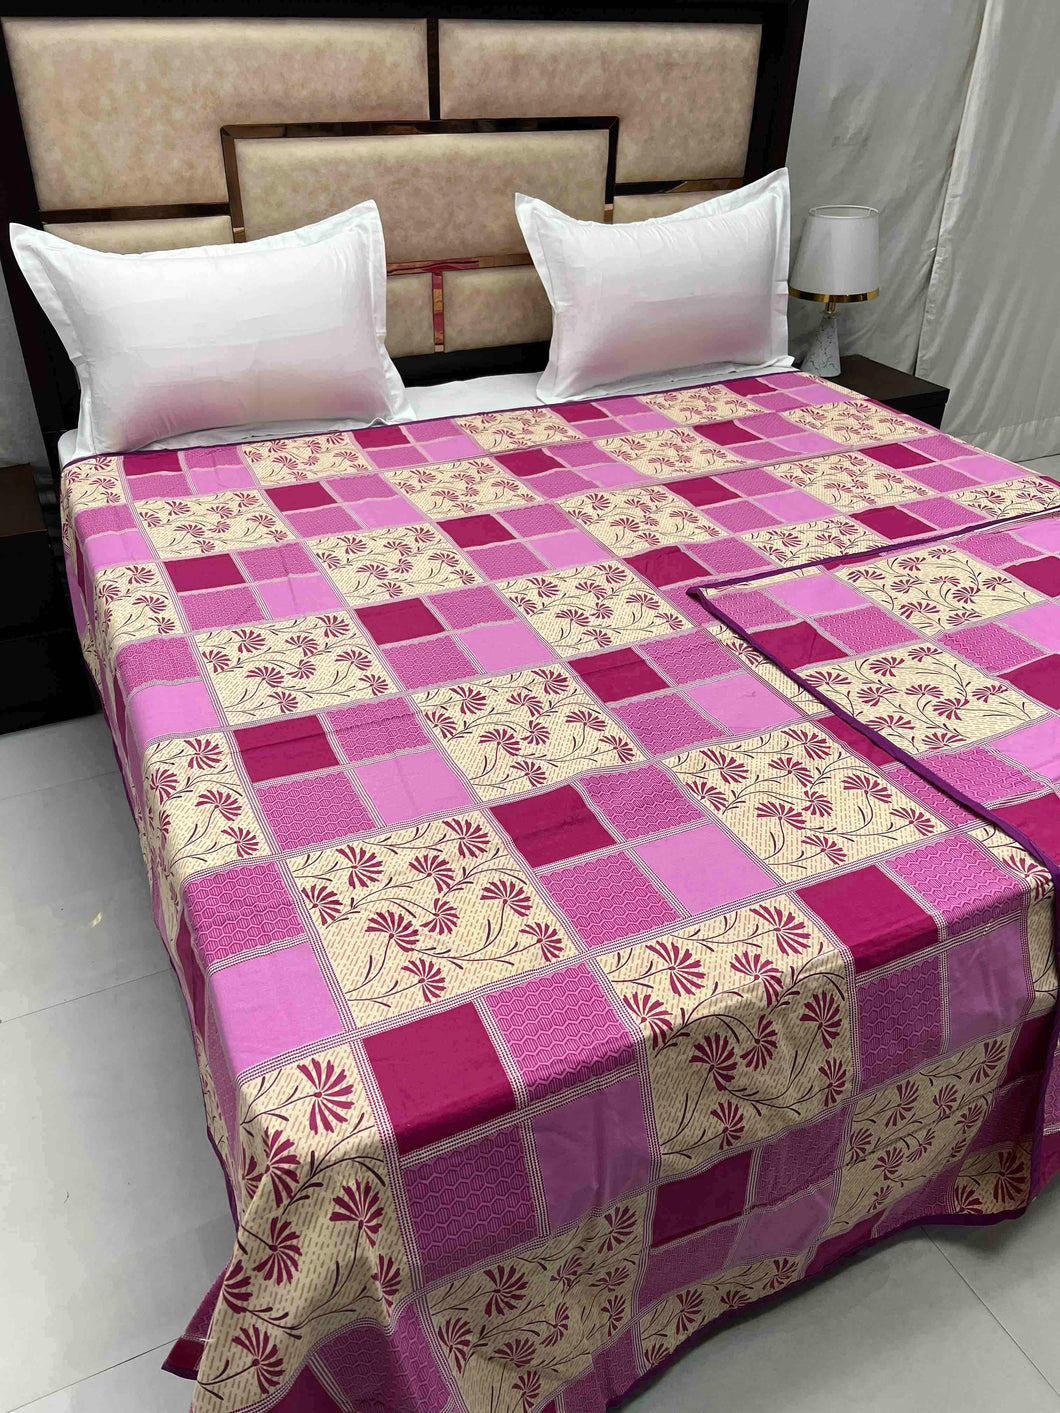 A-3563 - Pure Cotton 180 TC King Size Duvet Cover / Razaai Cover / Quilt Cover / Dohar Cover (223X243) for Double Bed Size with Heavy Zipper